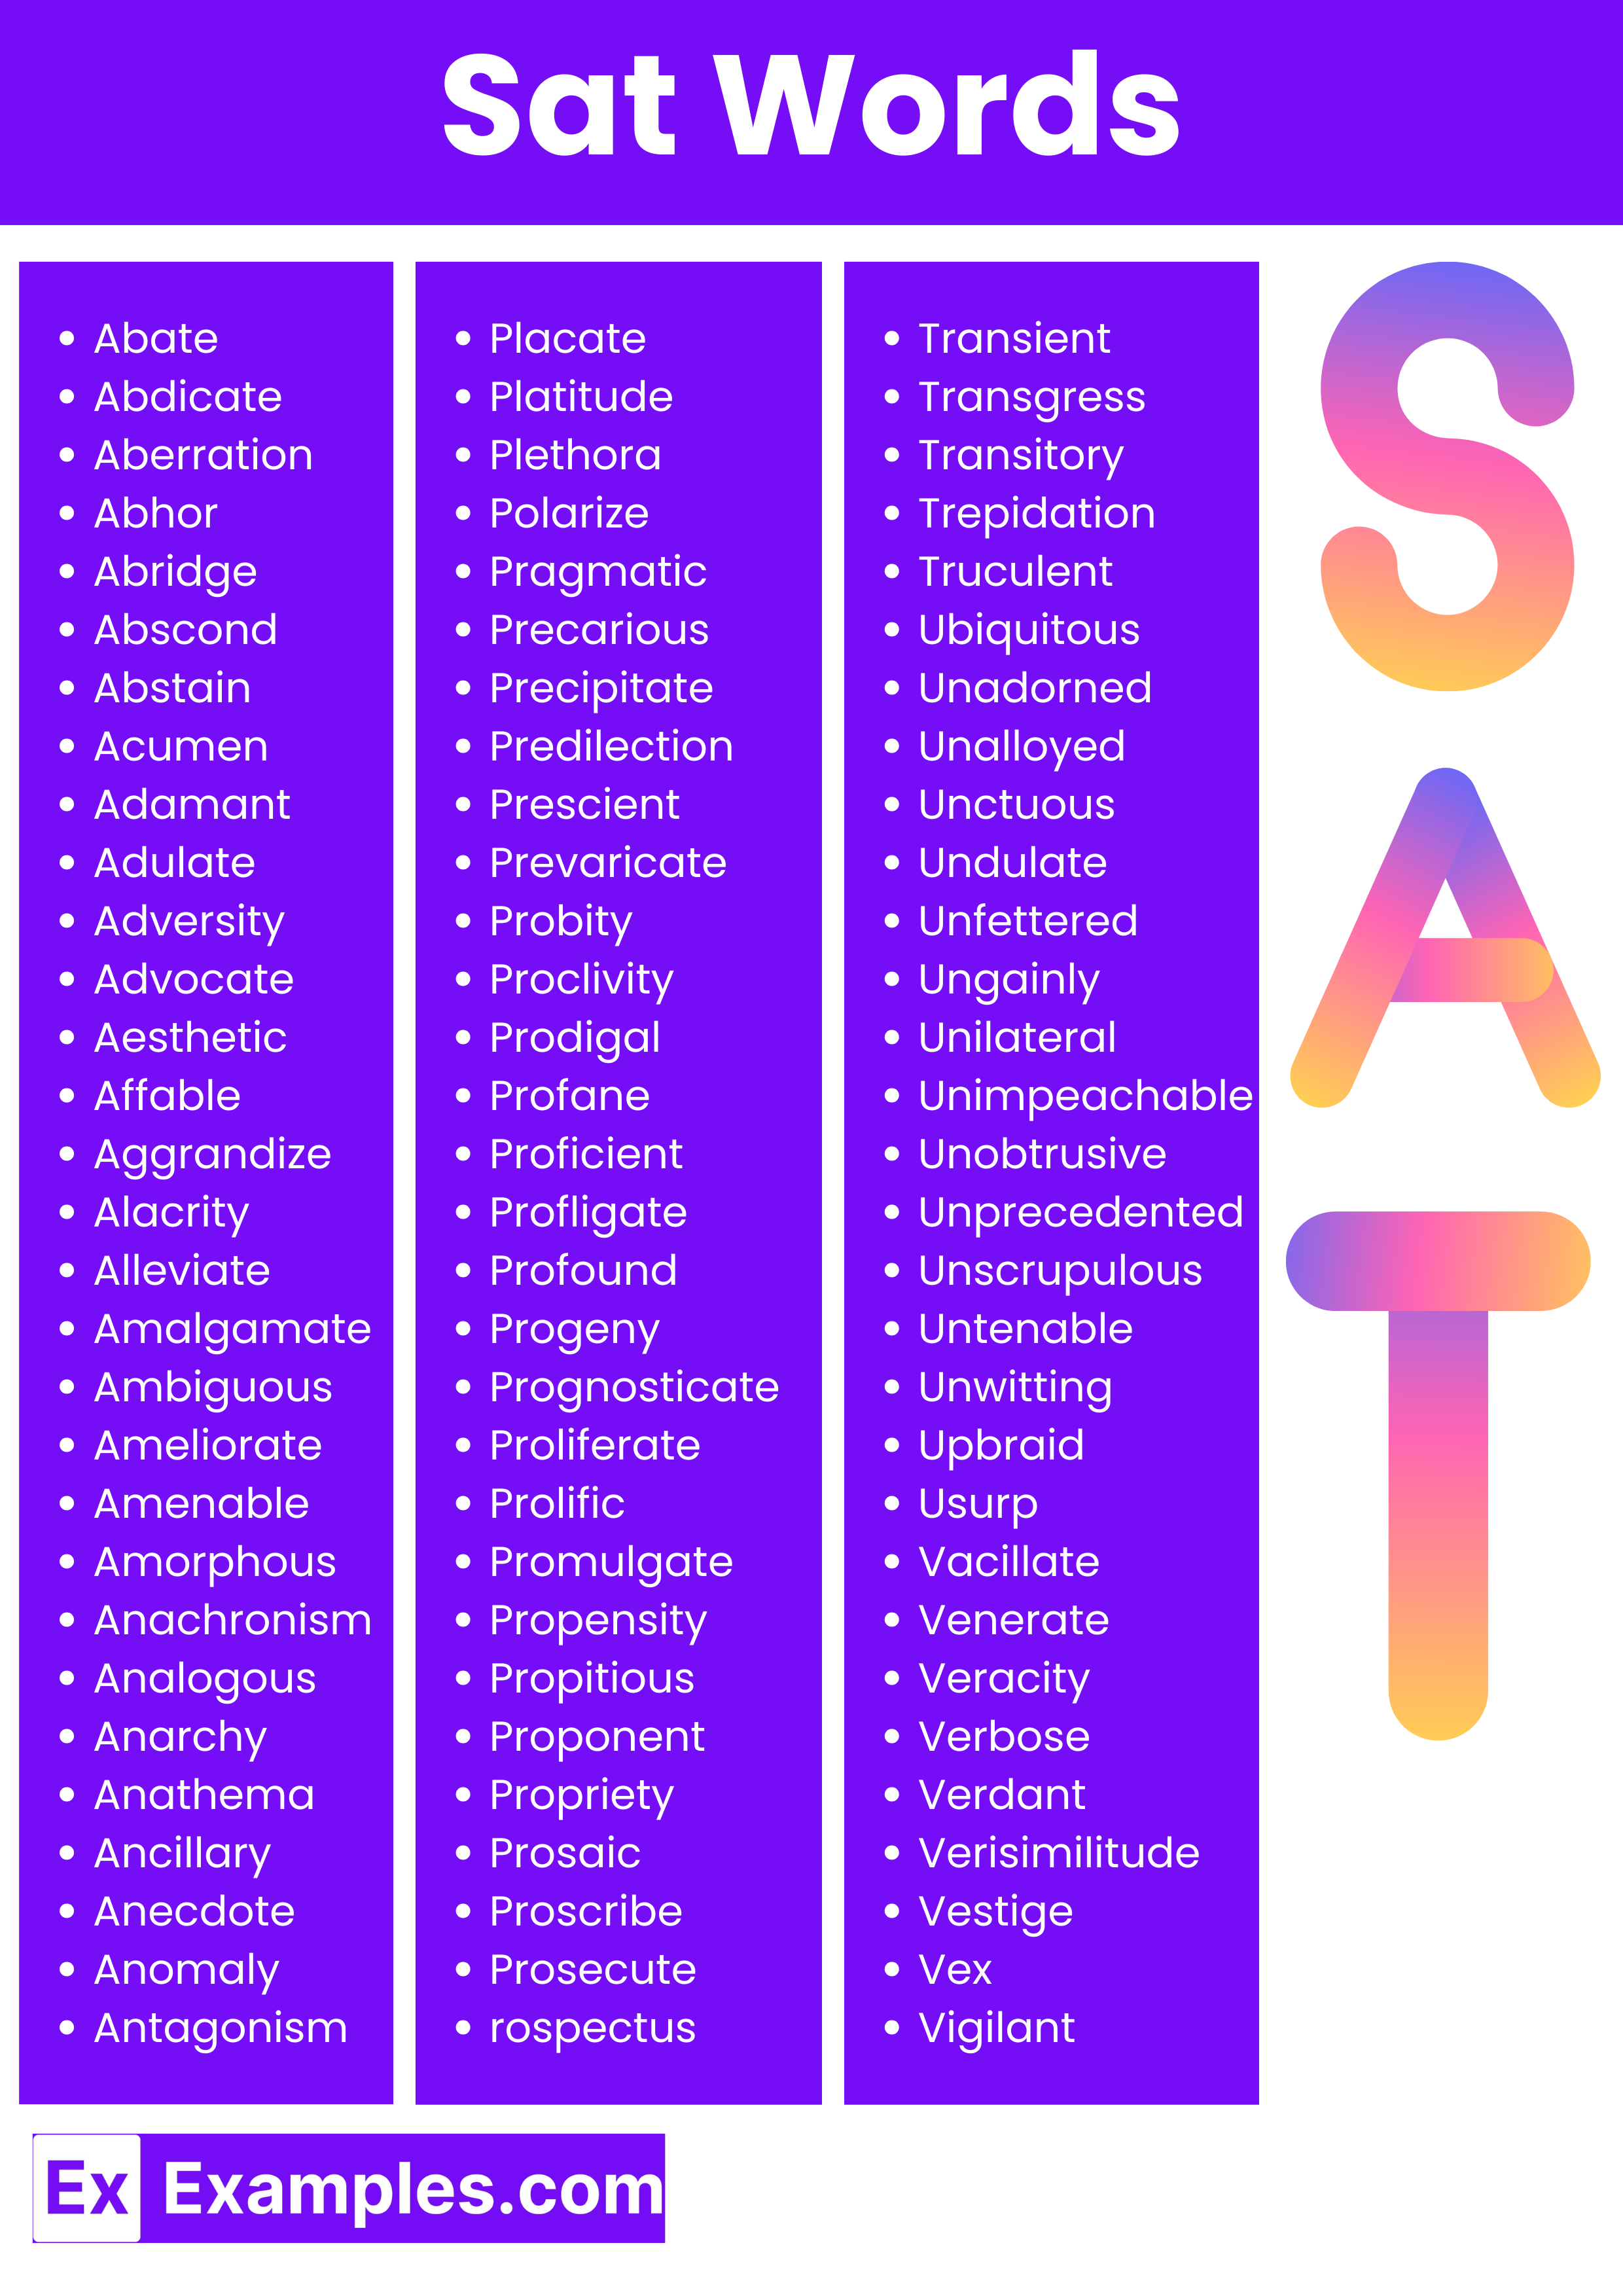 most commonly used a sat words